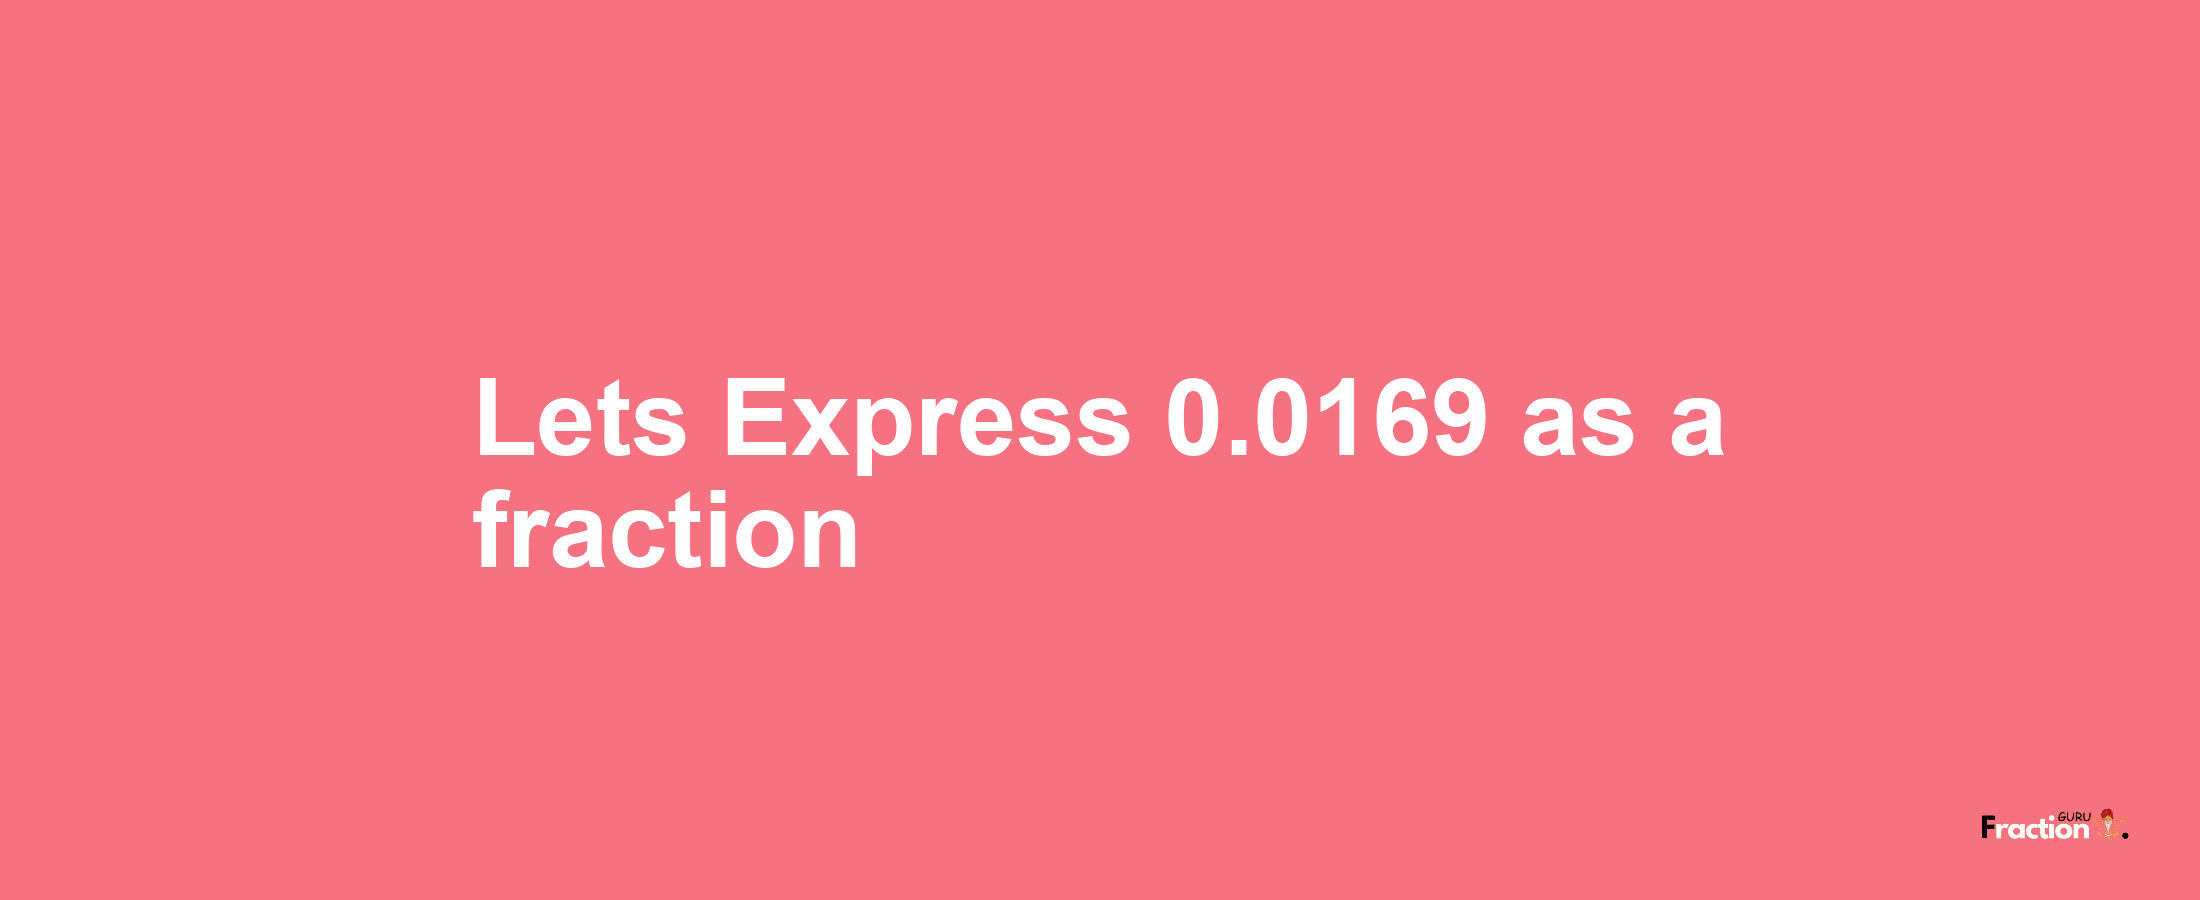 Lets Express 0.0169 as afraction